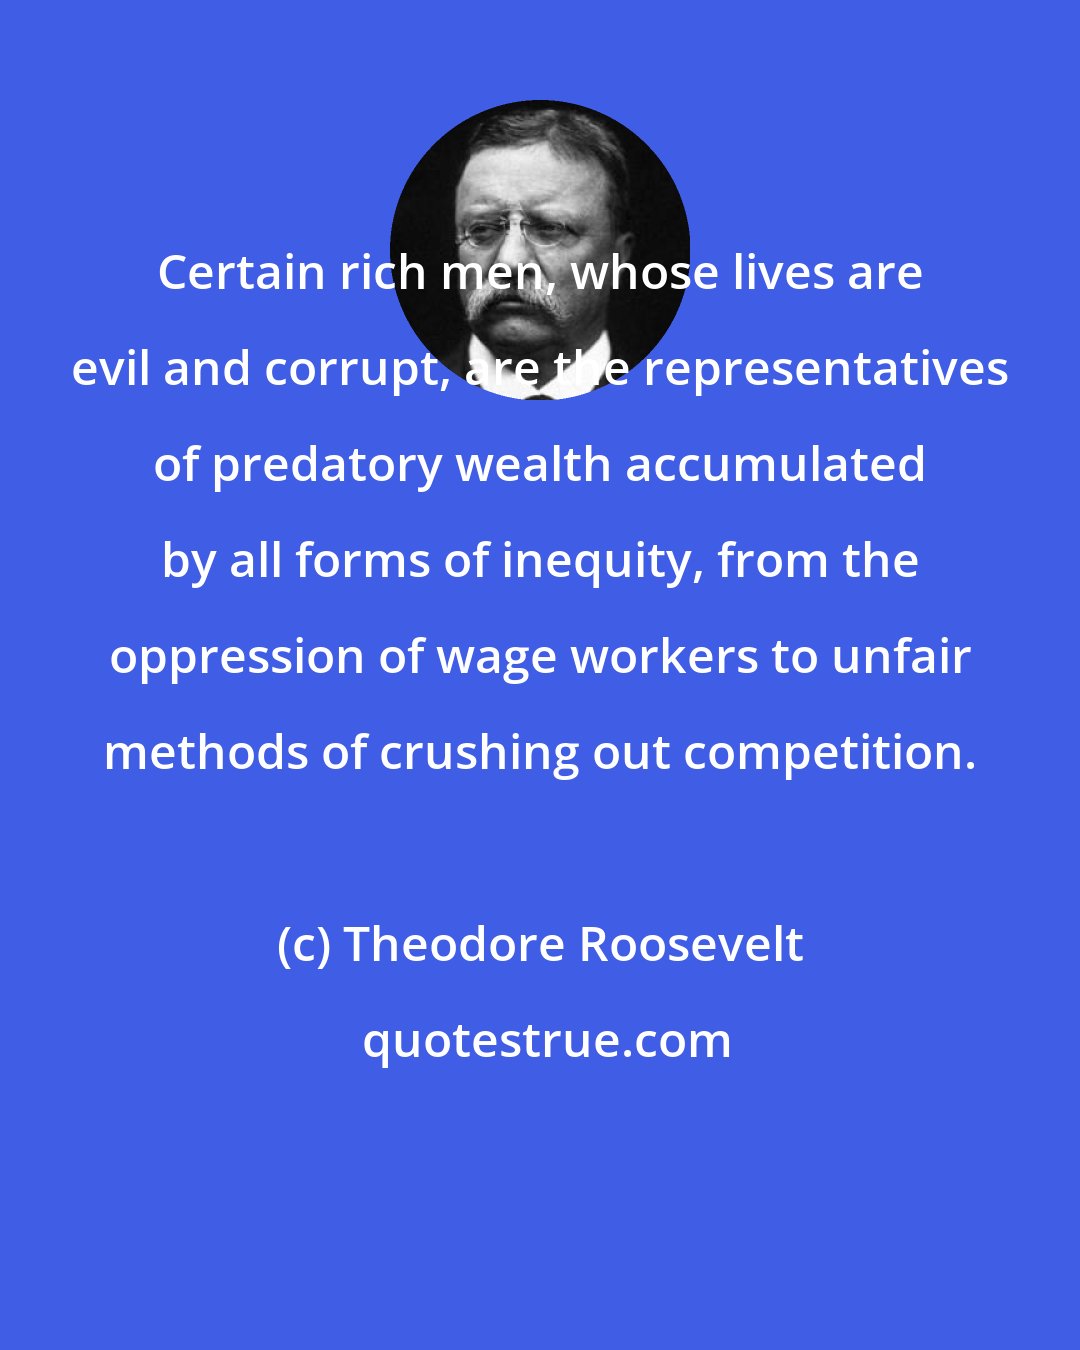 Theodore Roosevelt: Certain rich men, whose lives are evil and corrupt, are the representatives of predatory wealth accumulated by all forms of inequity, from the oppression of wage workers to unfair methods of crushing out competition.